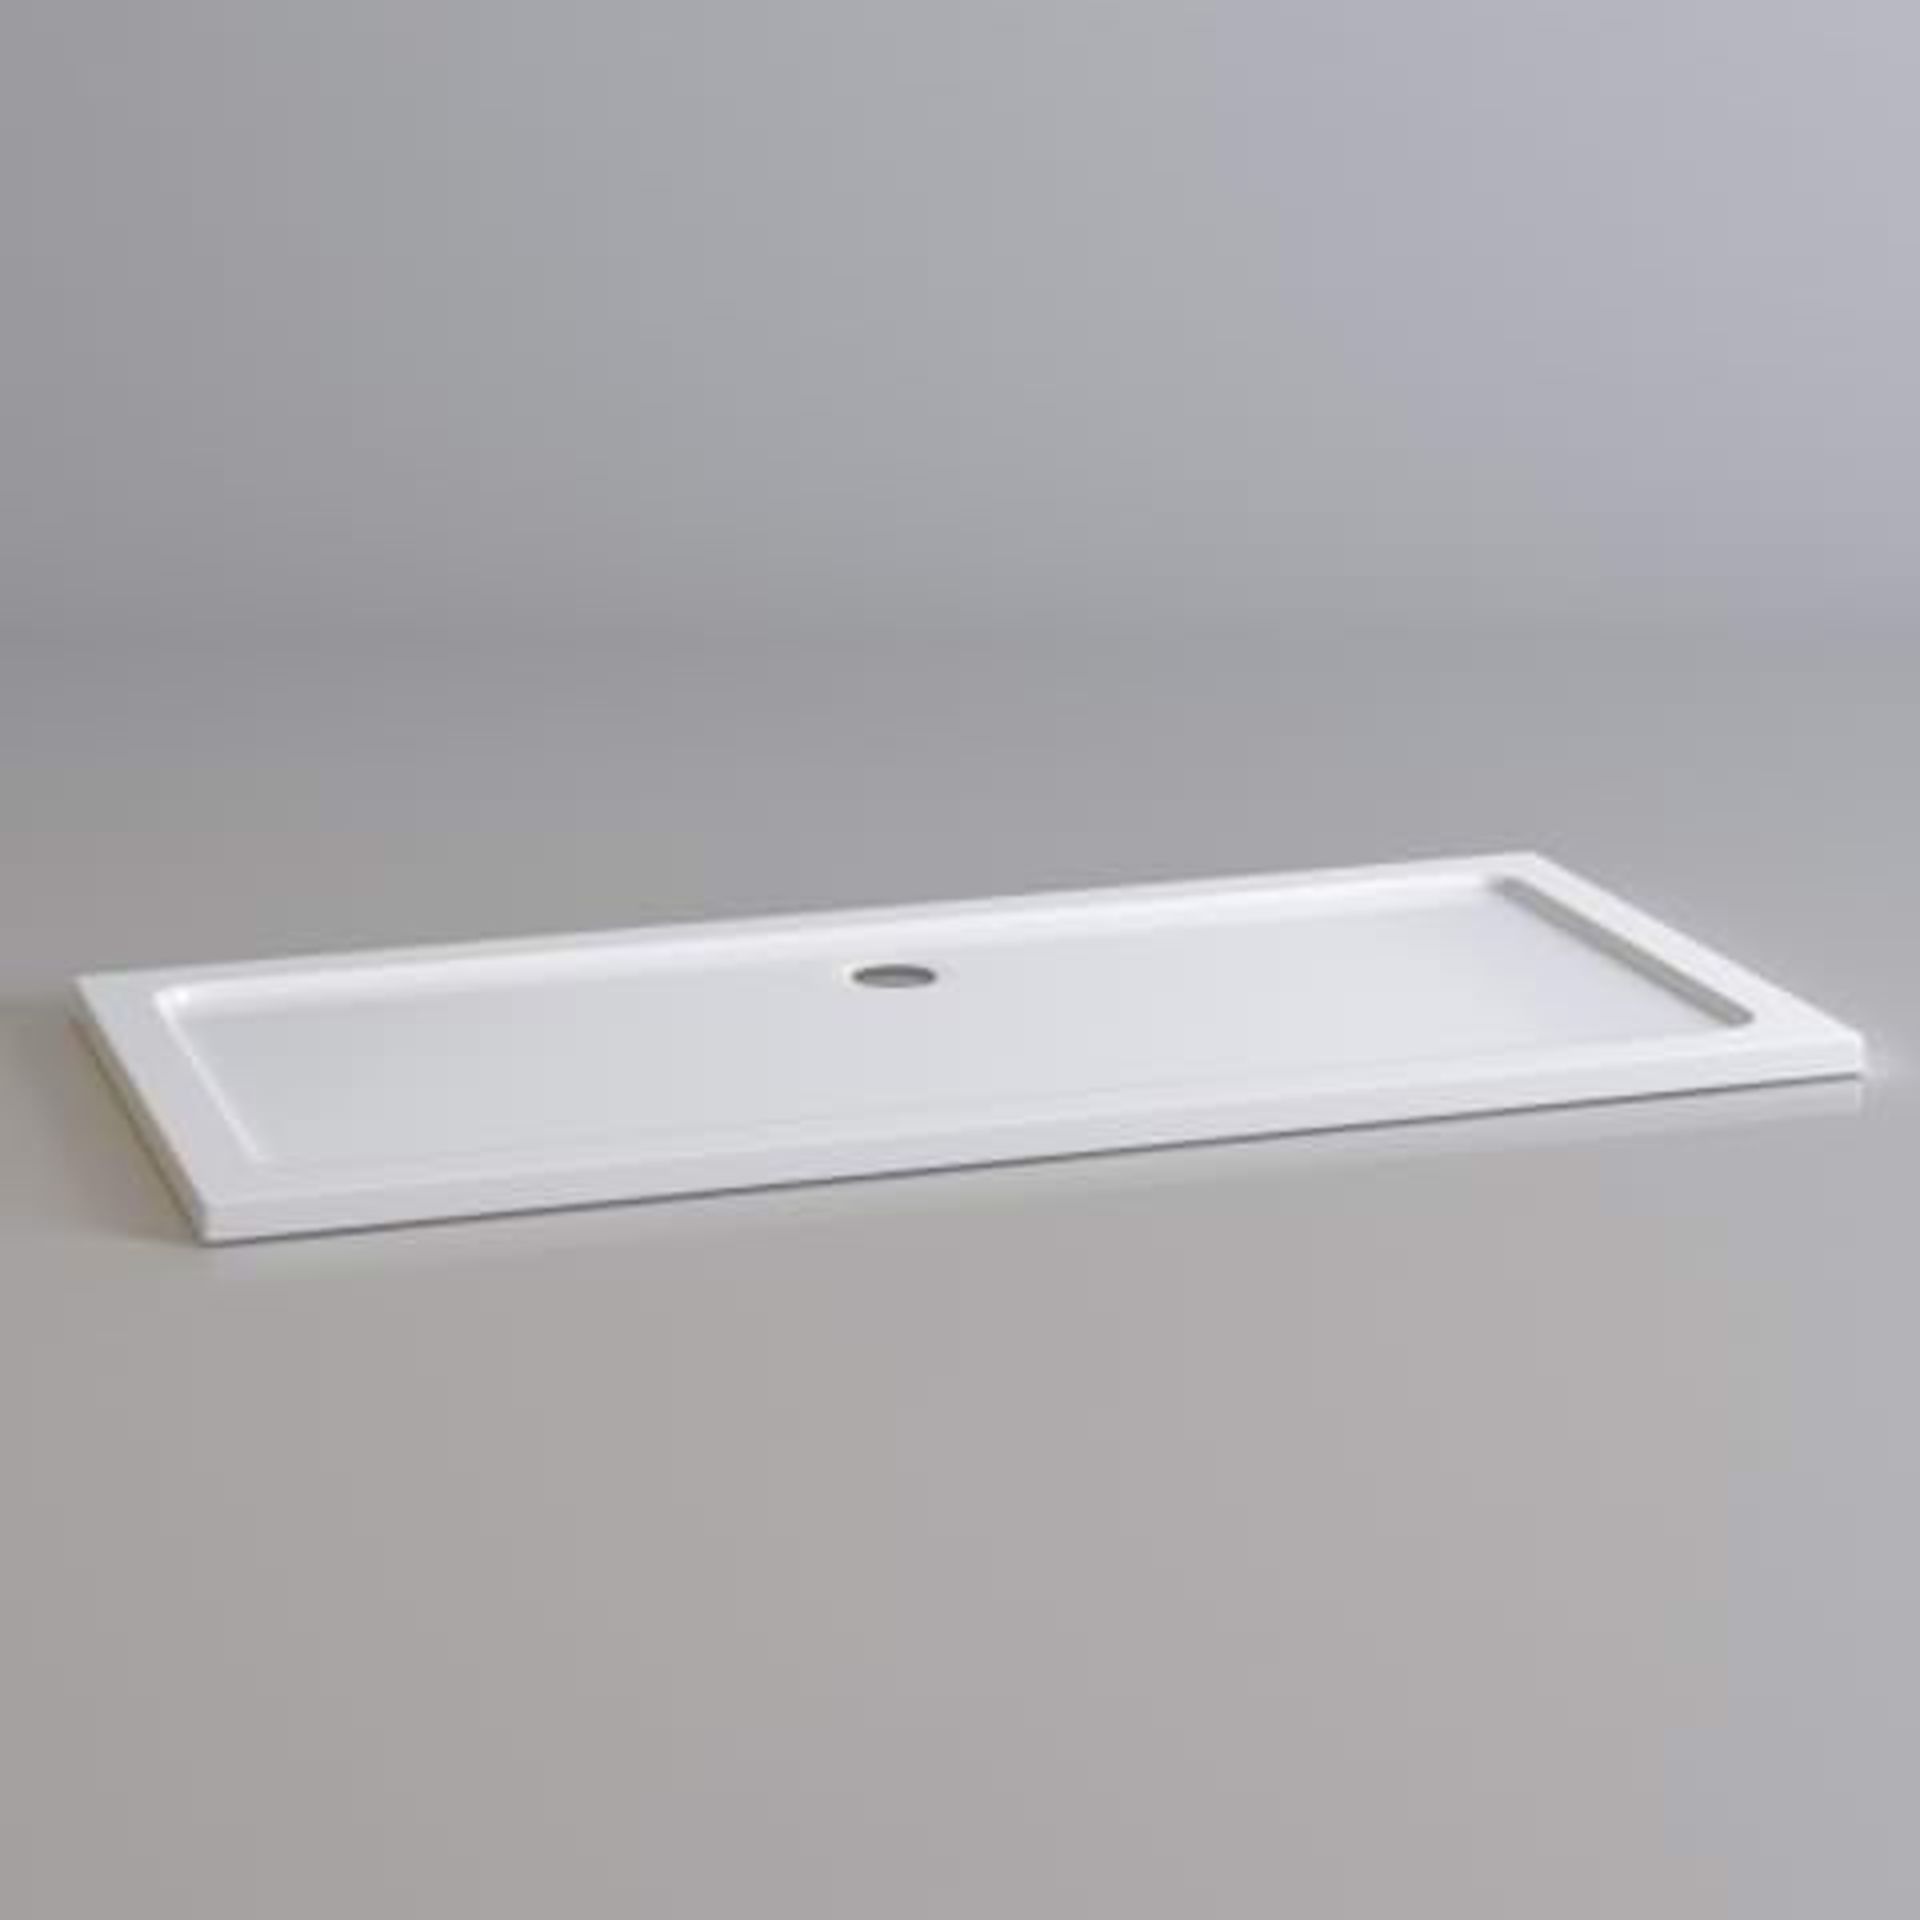 (M37) 1700x800mm Rectangular Ultraslim Stone Shower Tray. RRP £374.99. Designed and made carefully